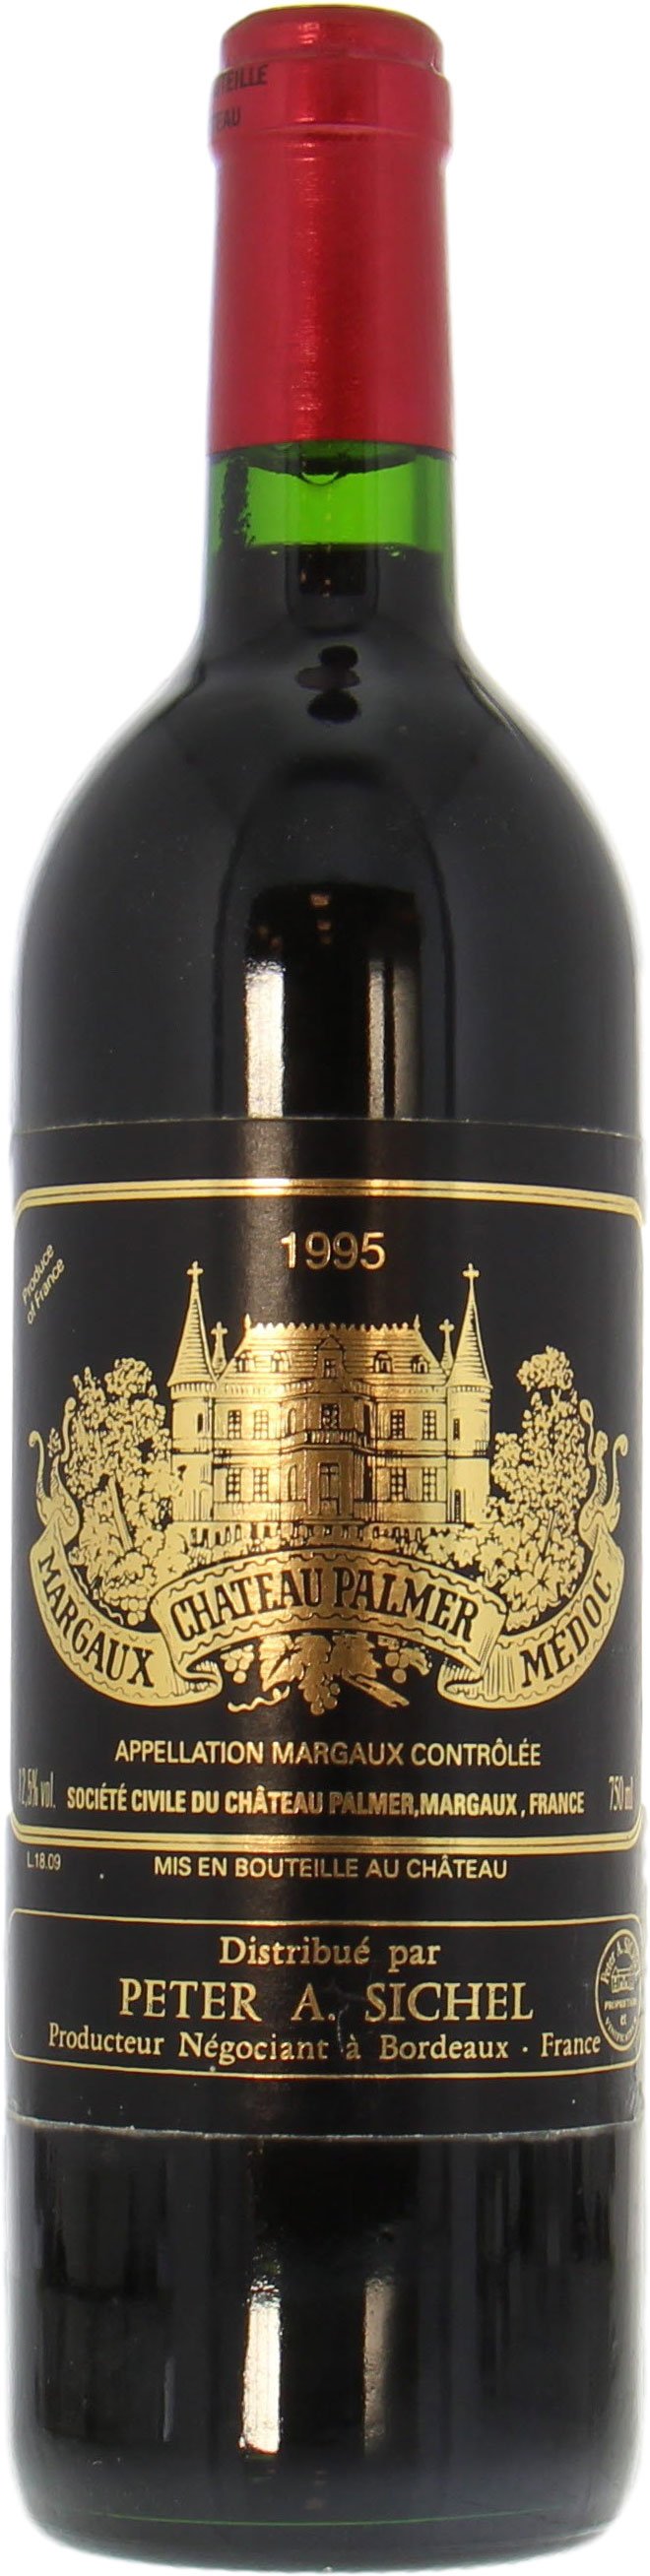 Chateau Palmer - Chateau Palmer 1995 From Original Wooden Case